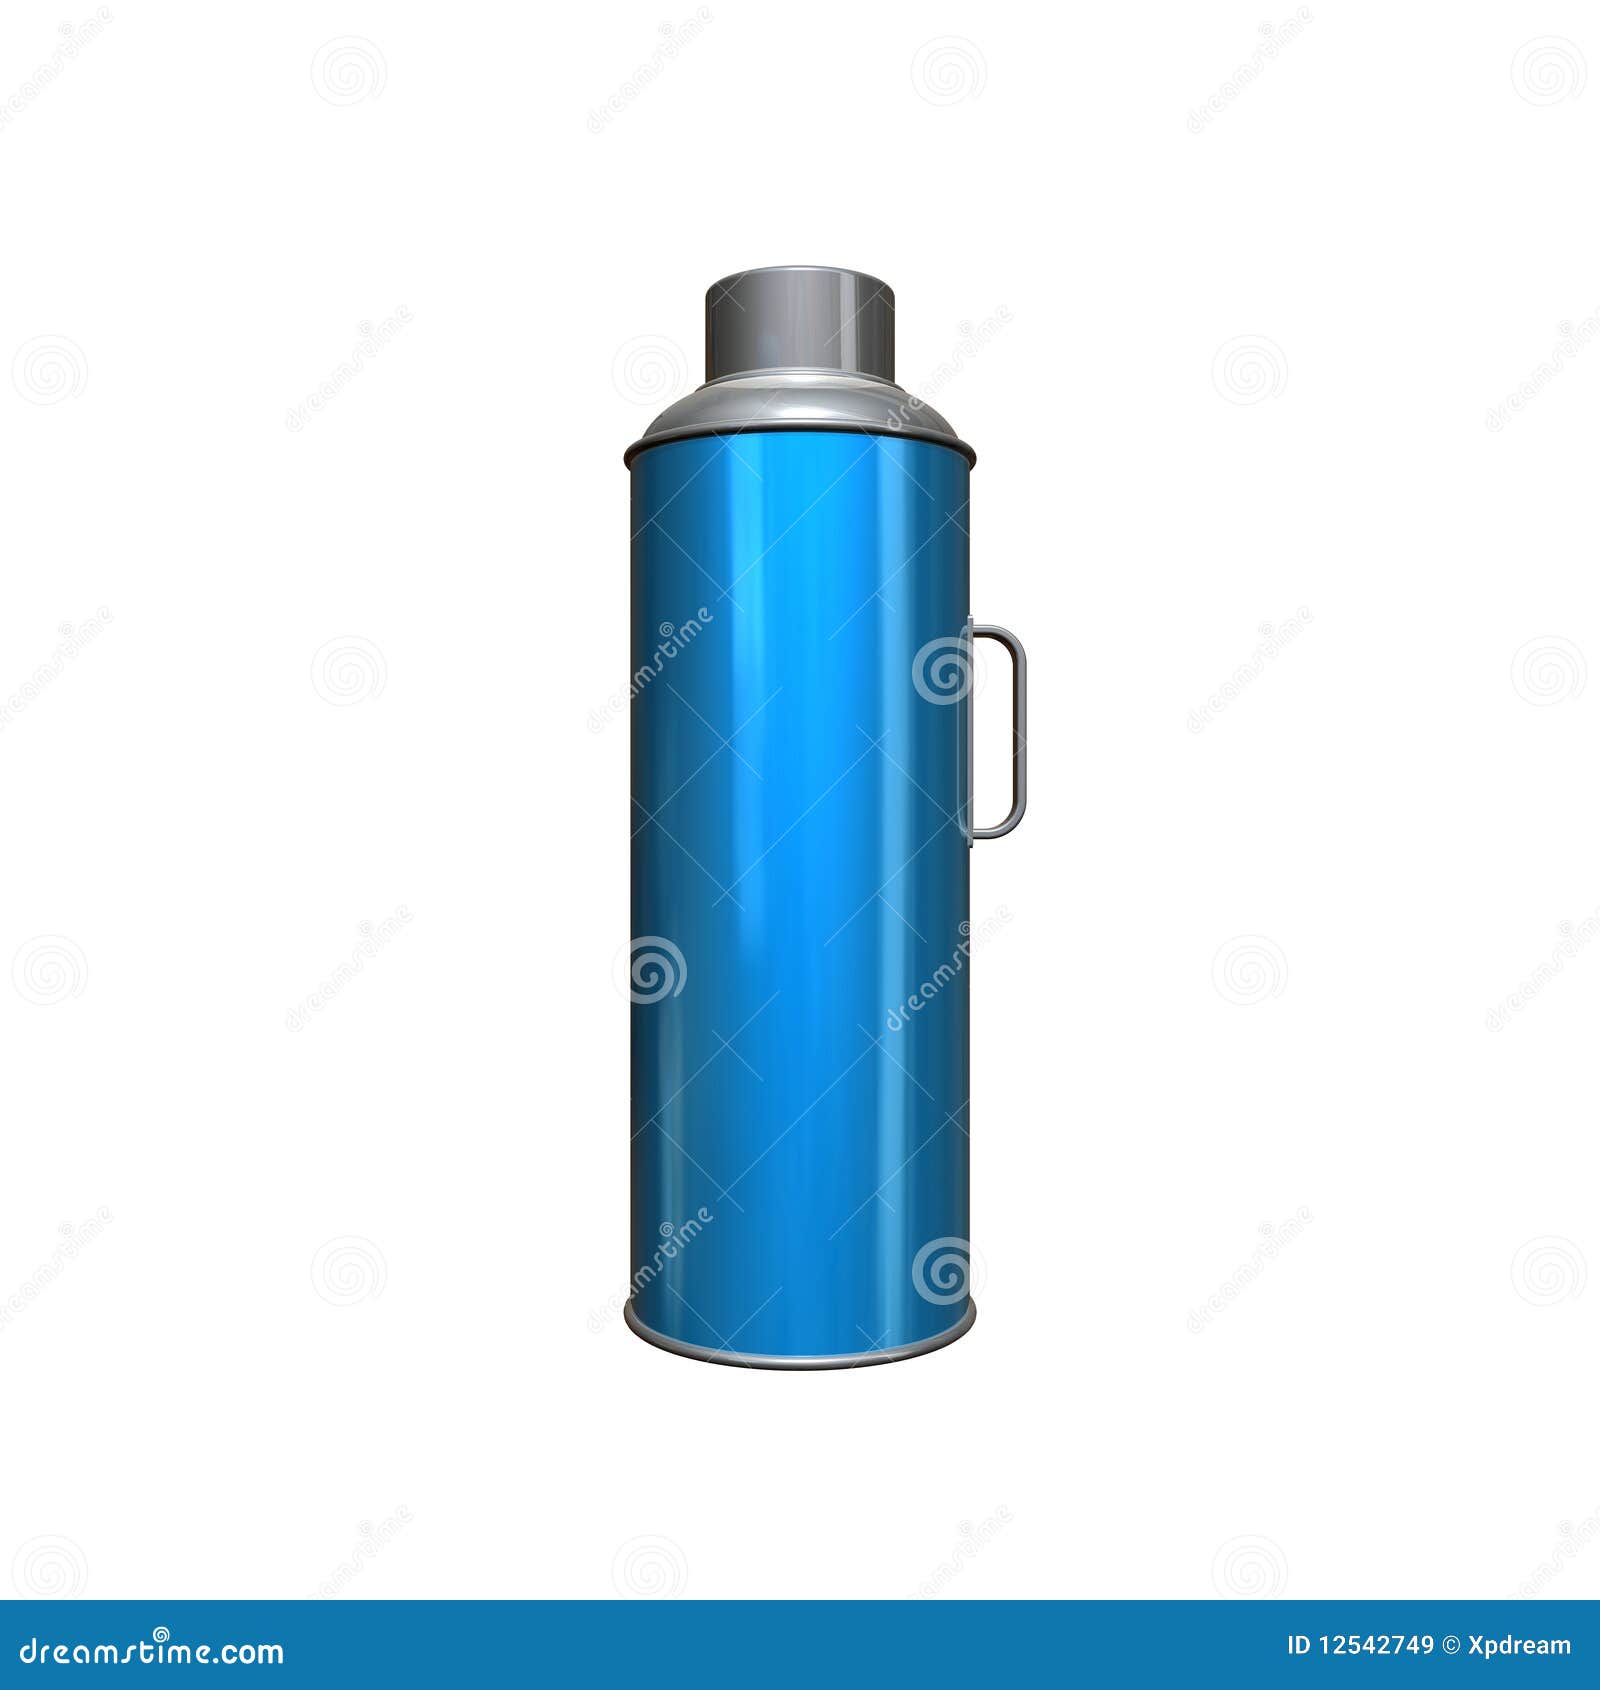 old thermos bottle